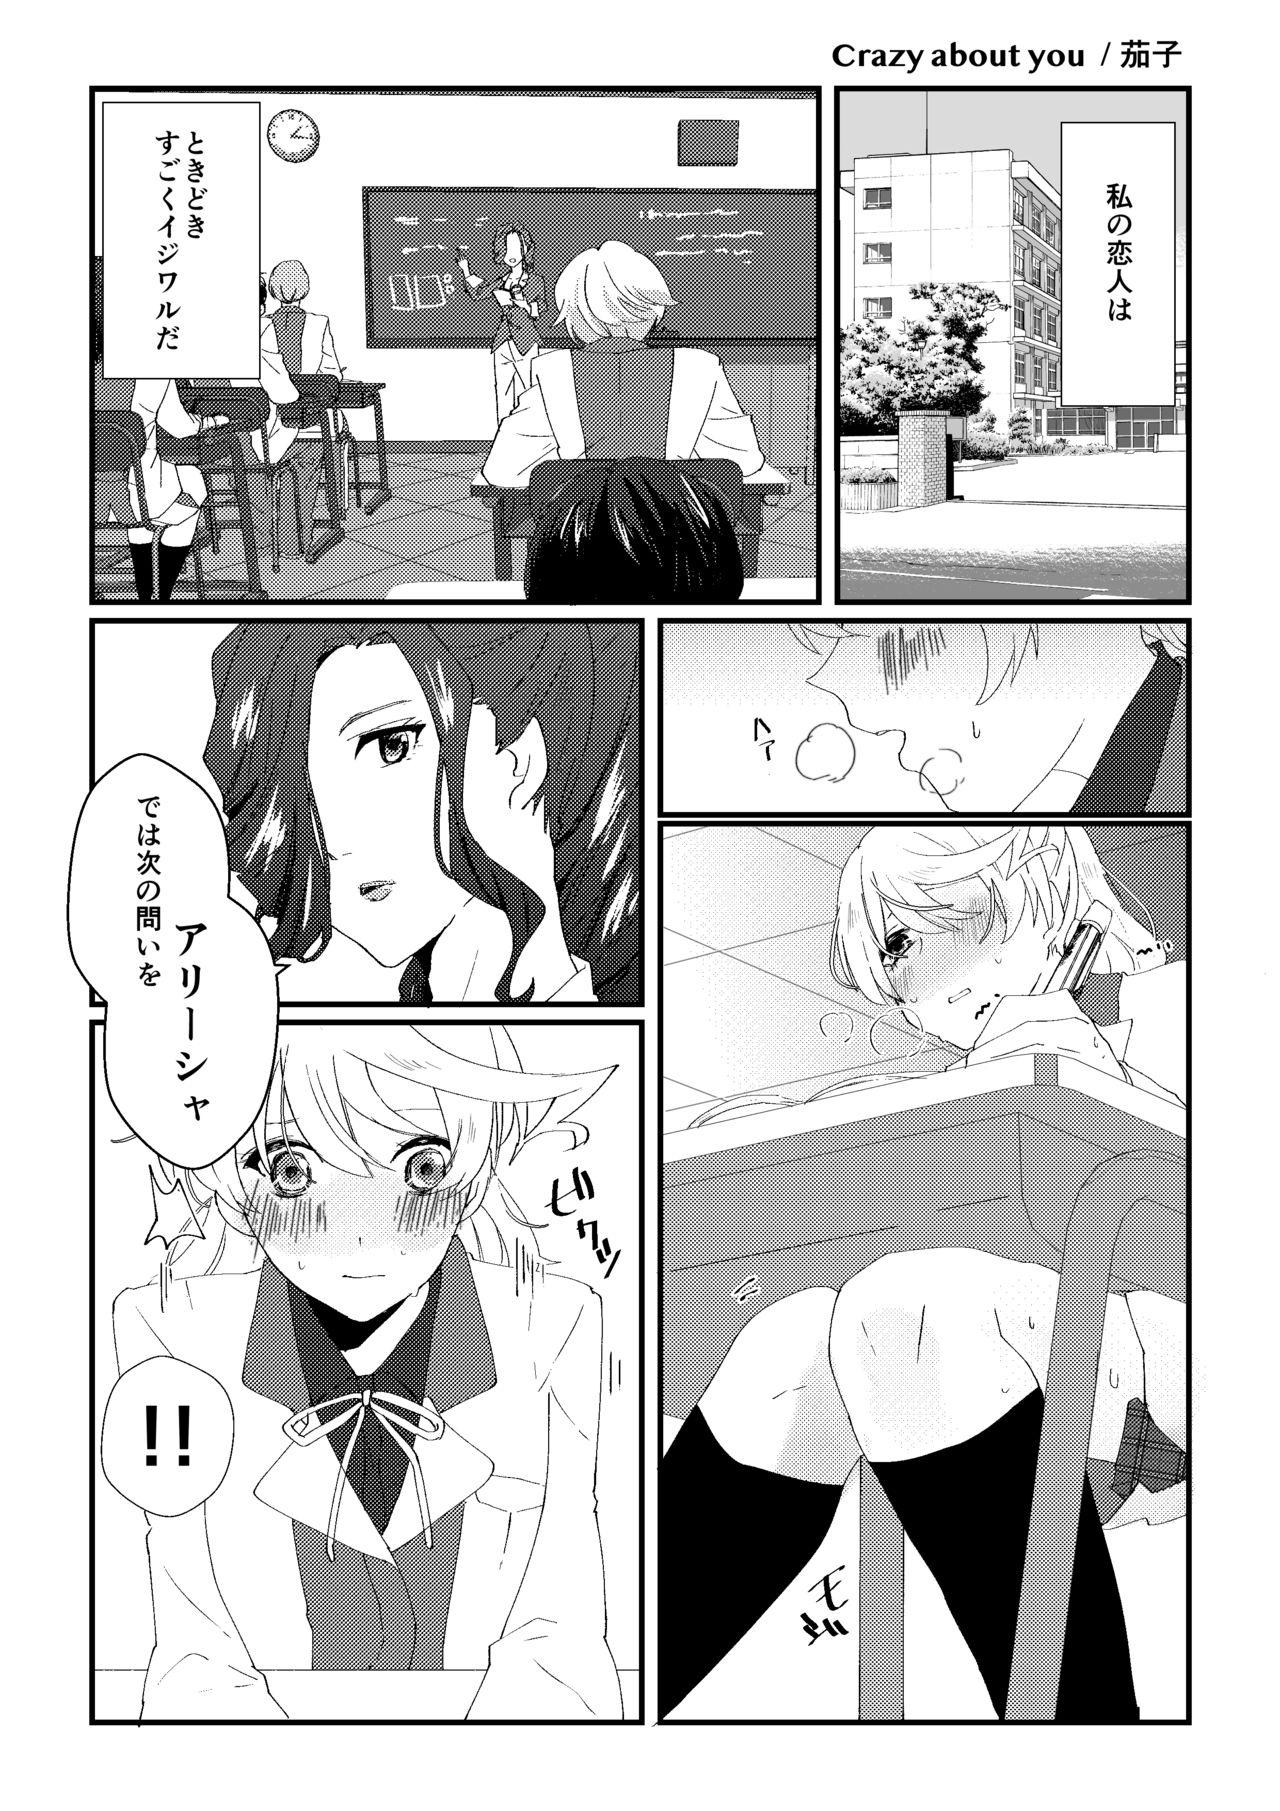 Massage crazy about you - Tales of zestiria Picked Up - Page 2